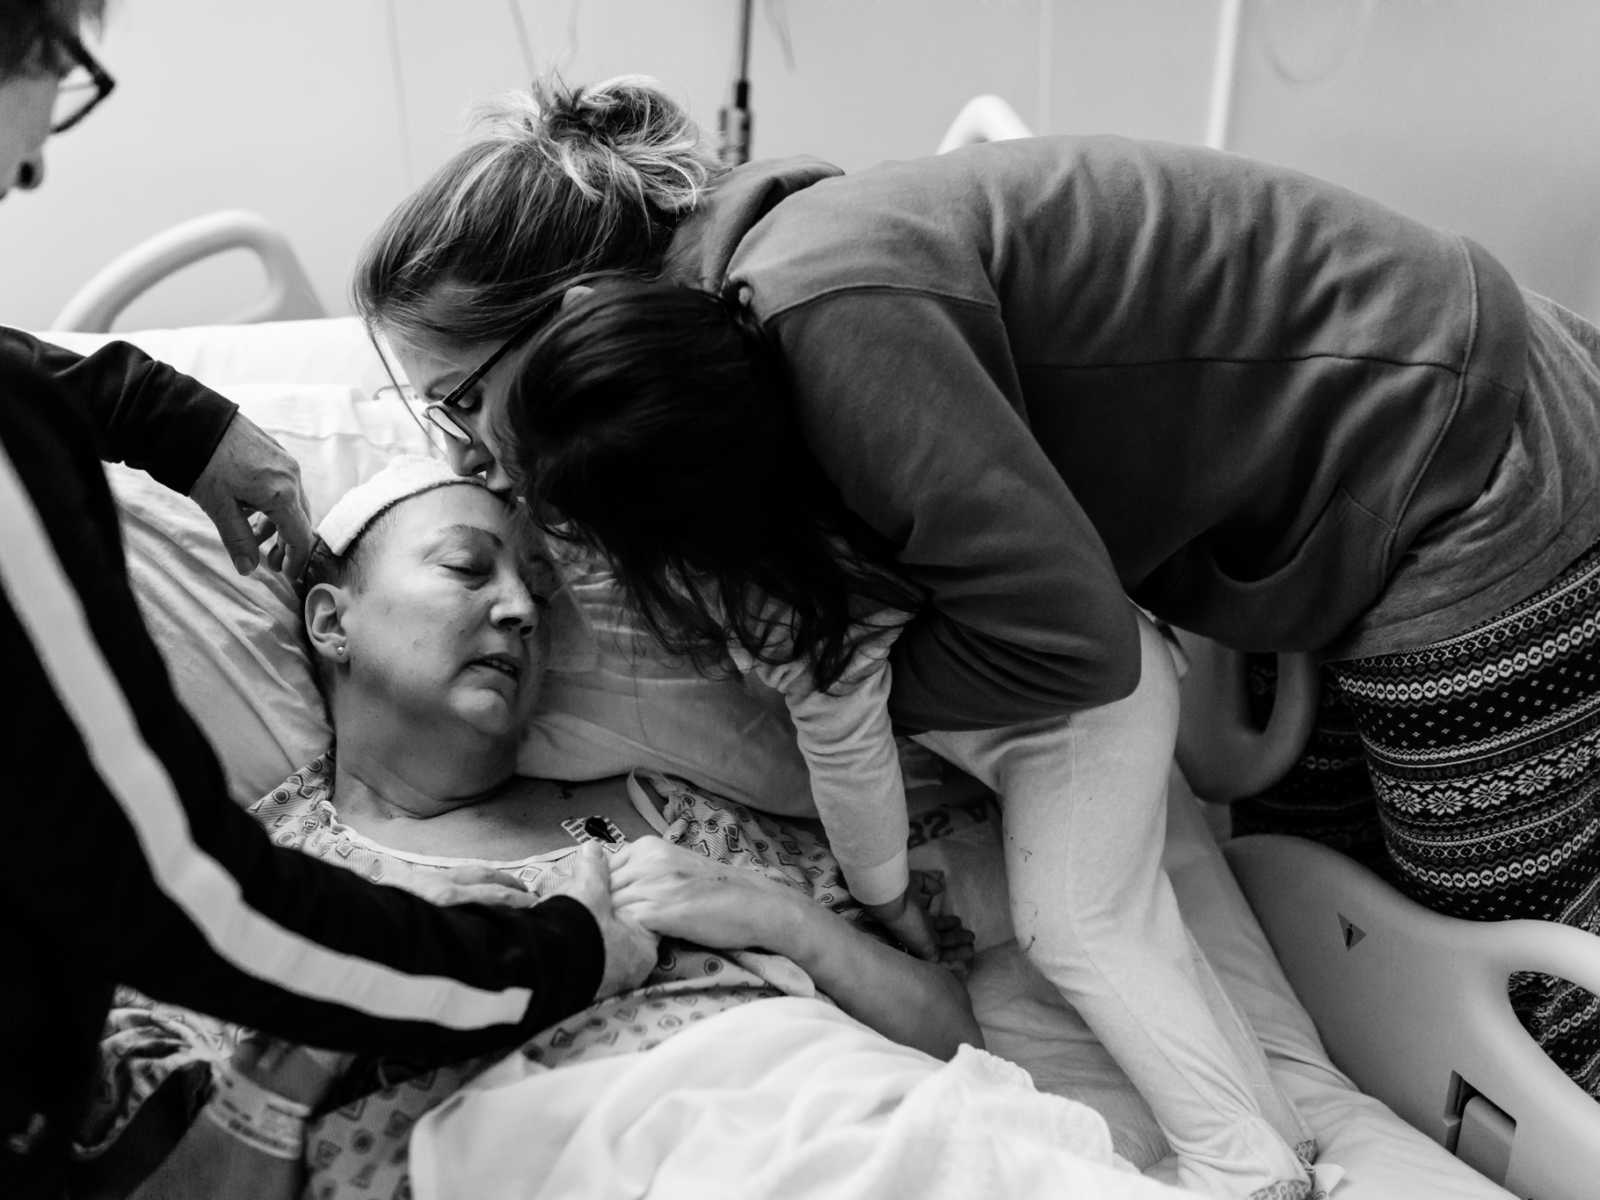 Woman with non-hodgkin's lymphoma receives kiss on forehead from sister who is holding toddler 